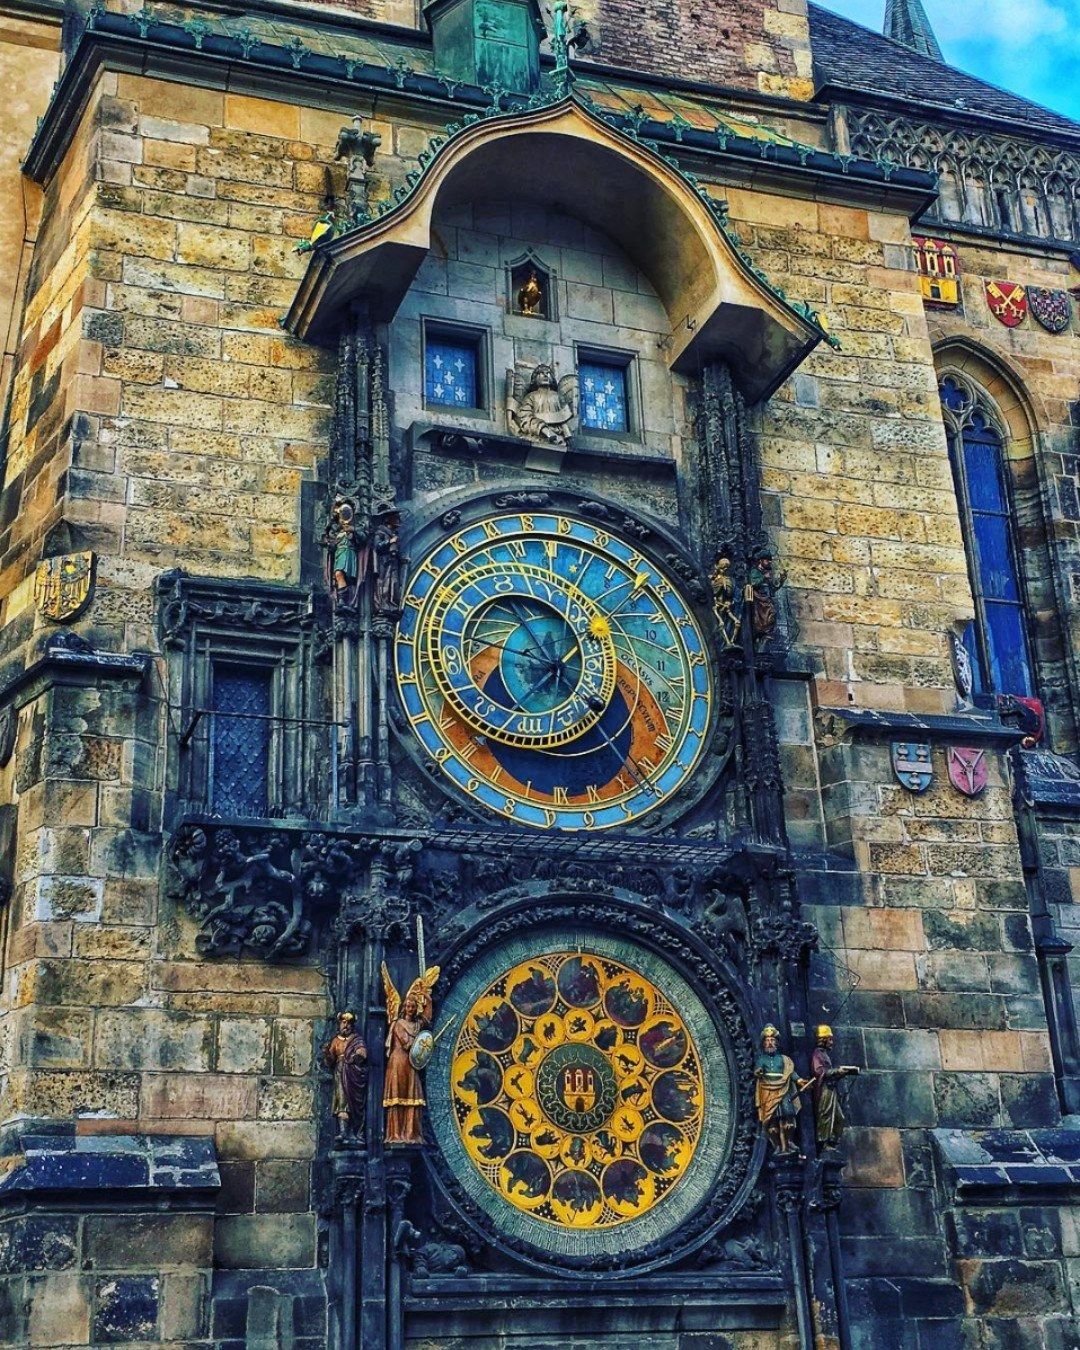 A 600 Year Old Astronomical Clock In Prague Scrolller